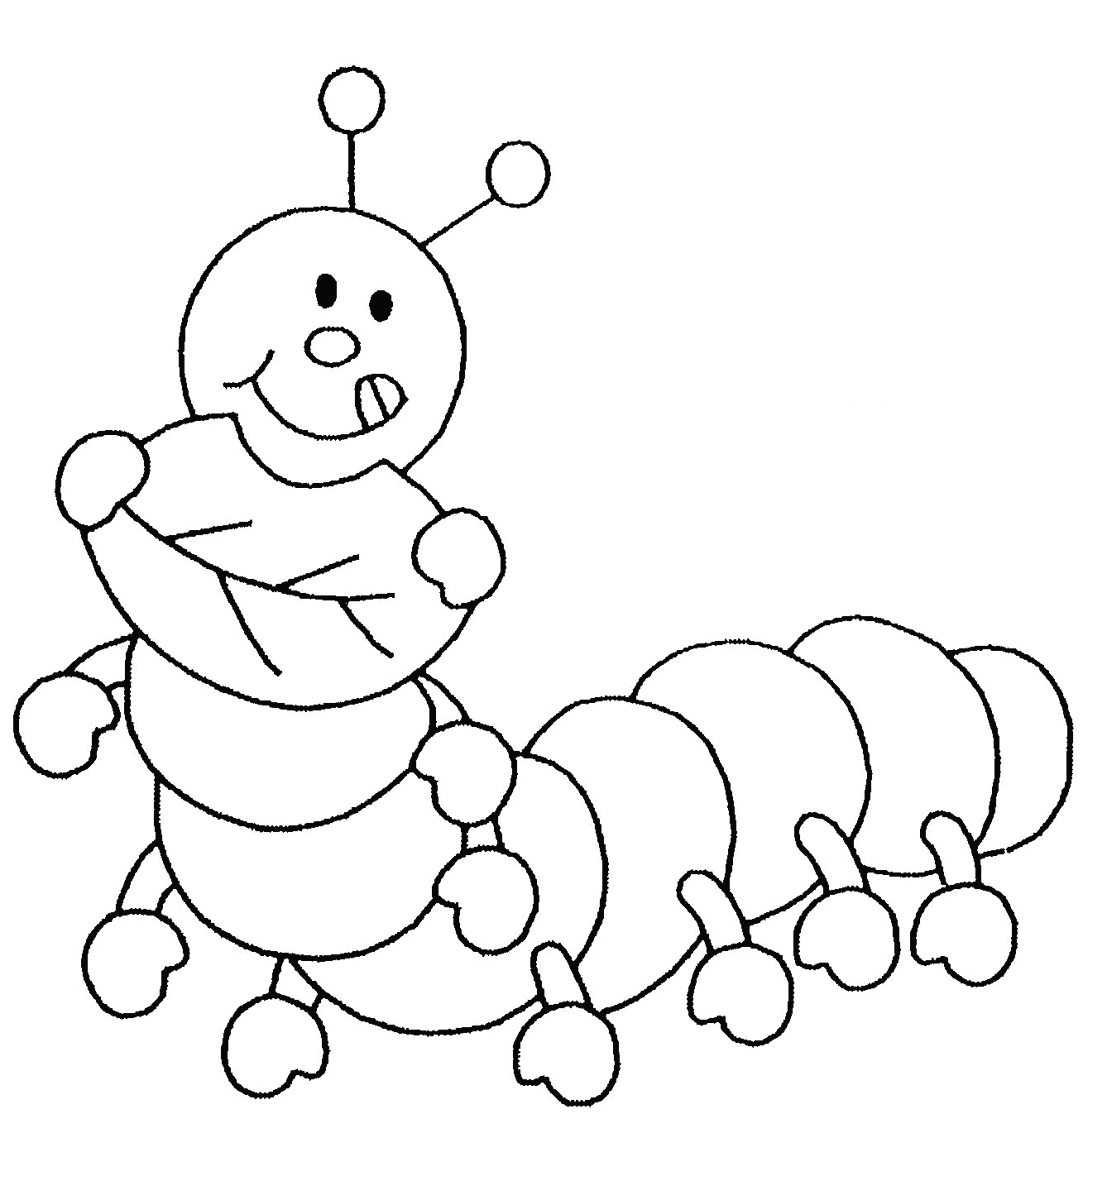 Drawings Caterpillar (Animals) – Printable coloring pages